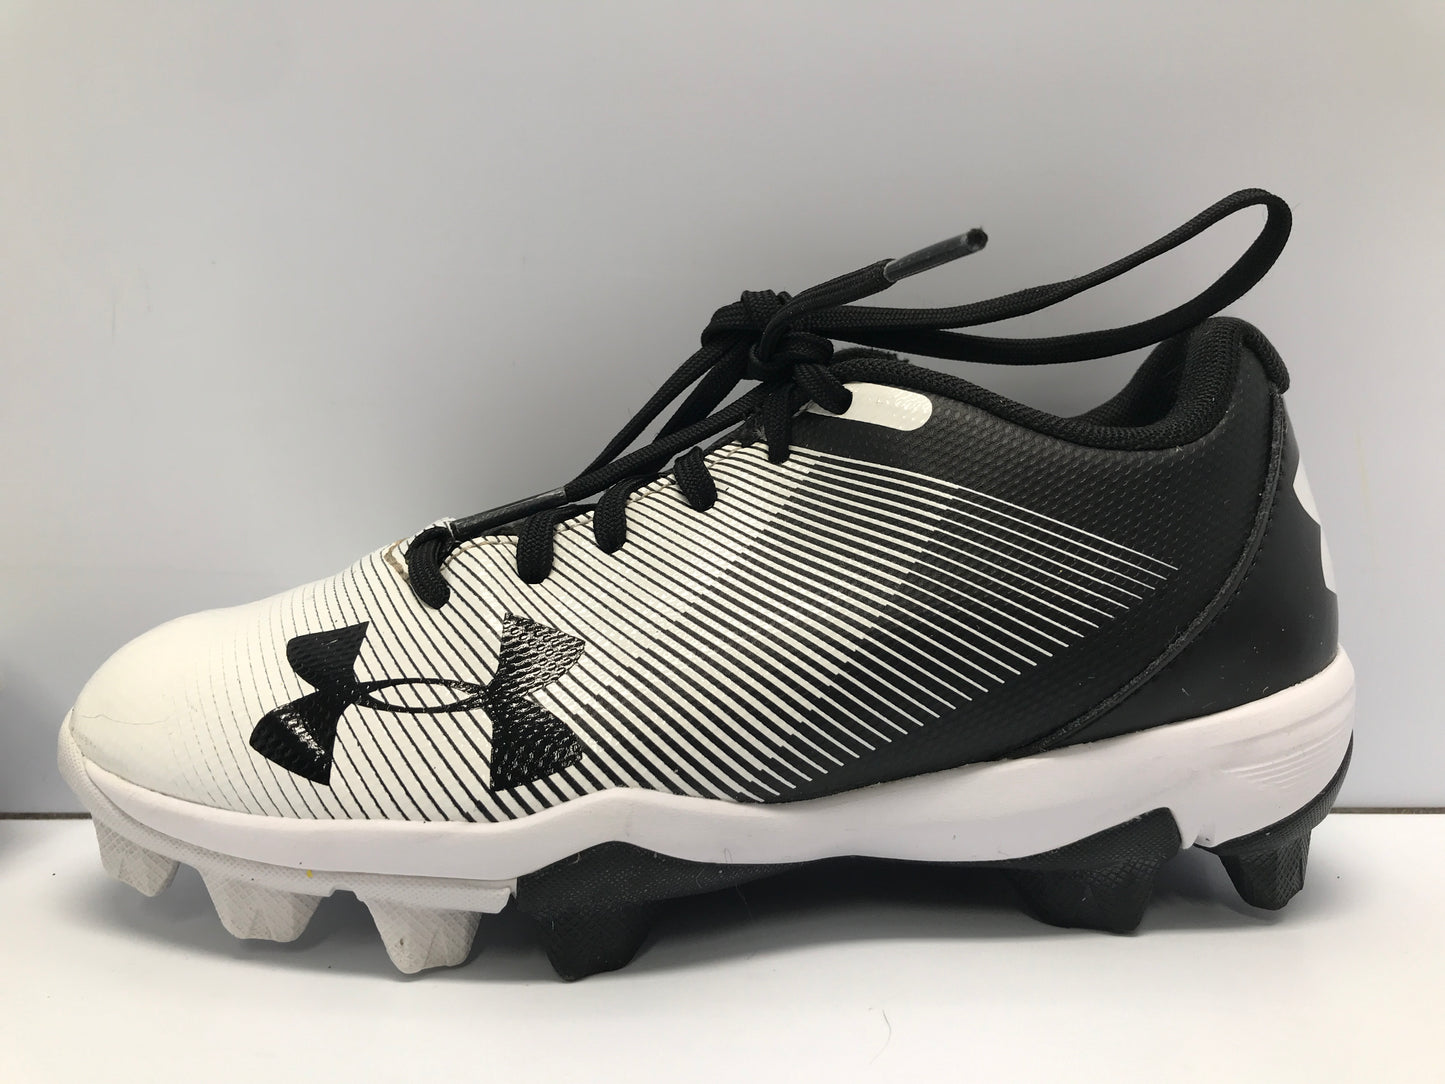 Baseball Shoes Cleats Child Size 1 Under Armour Black White Like New